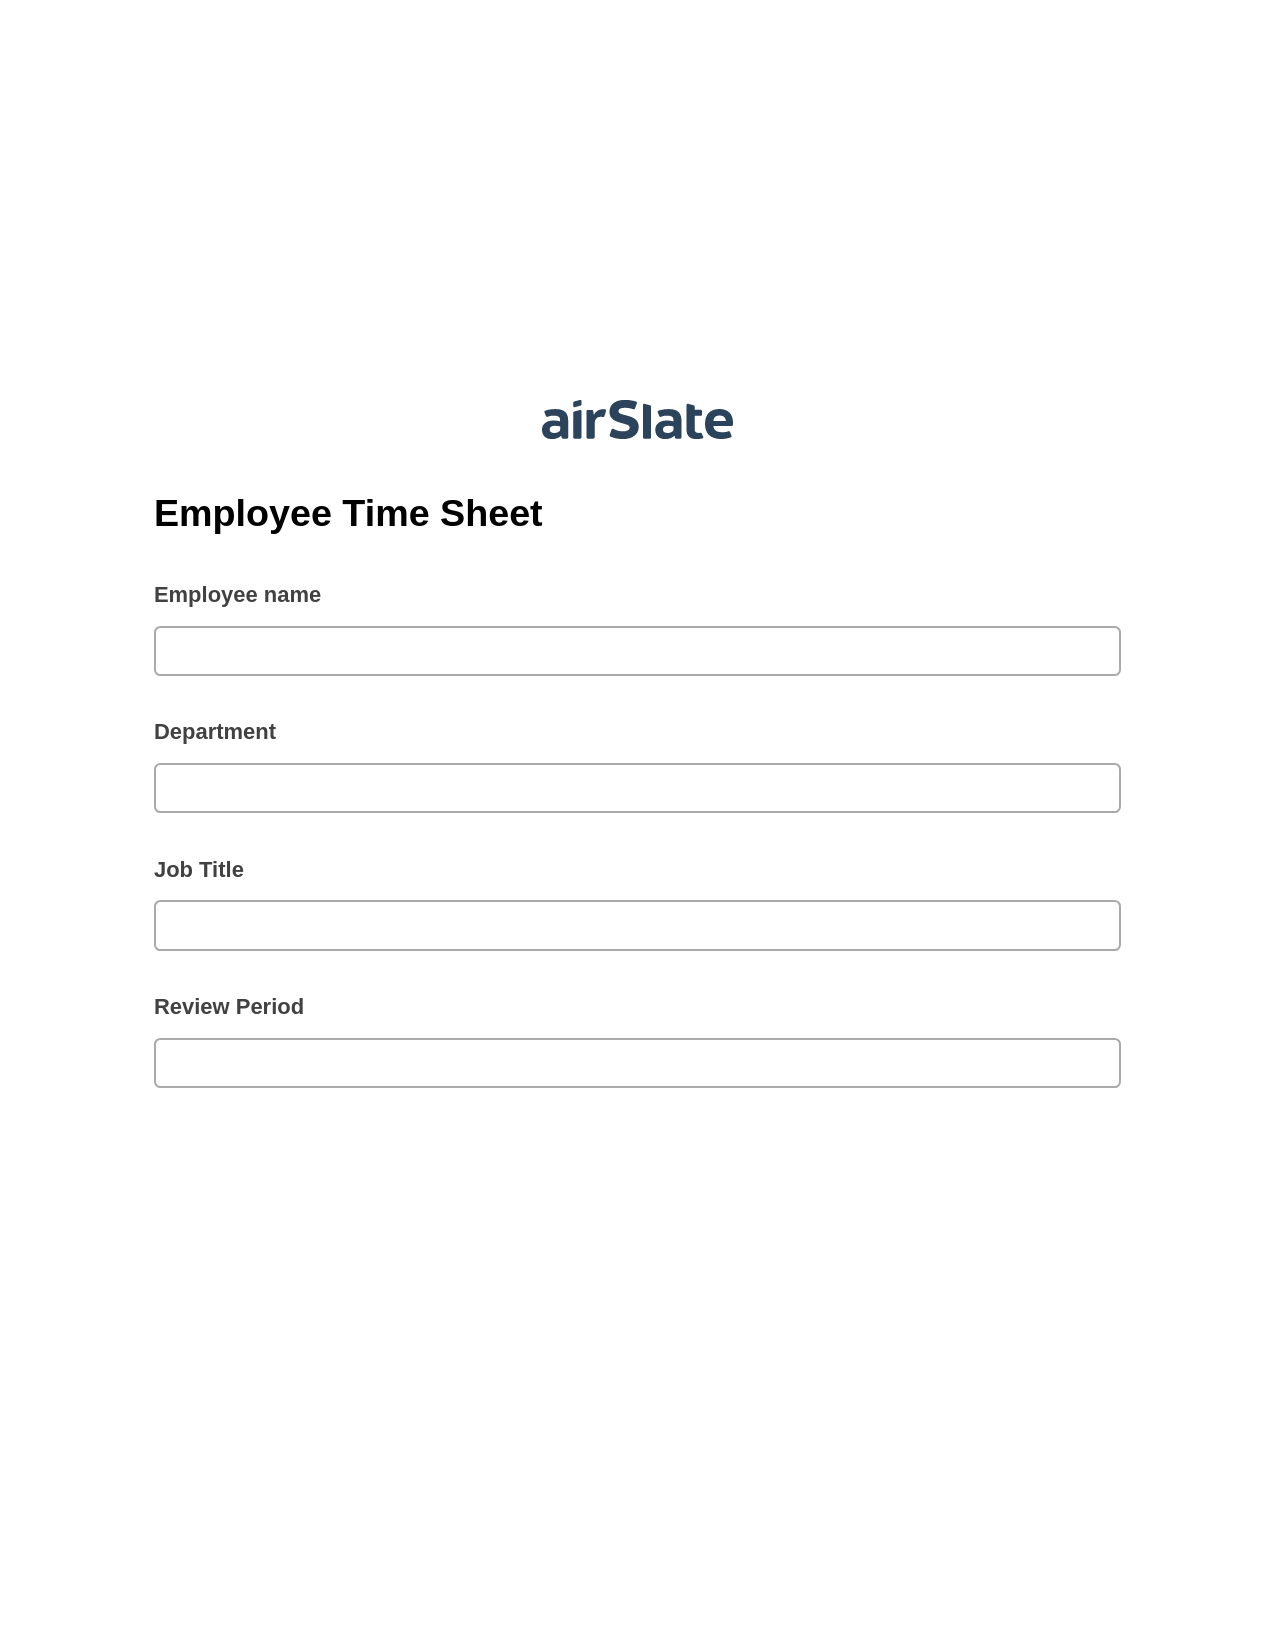 Multirole Employee Time Sheet Pre-fill from Salesforce Records with SOQL Bot, Update Audit Trail Bot, Export to Google Sheet Bot